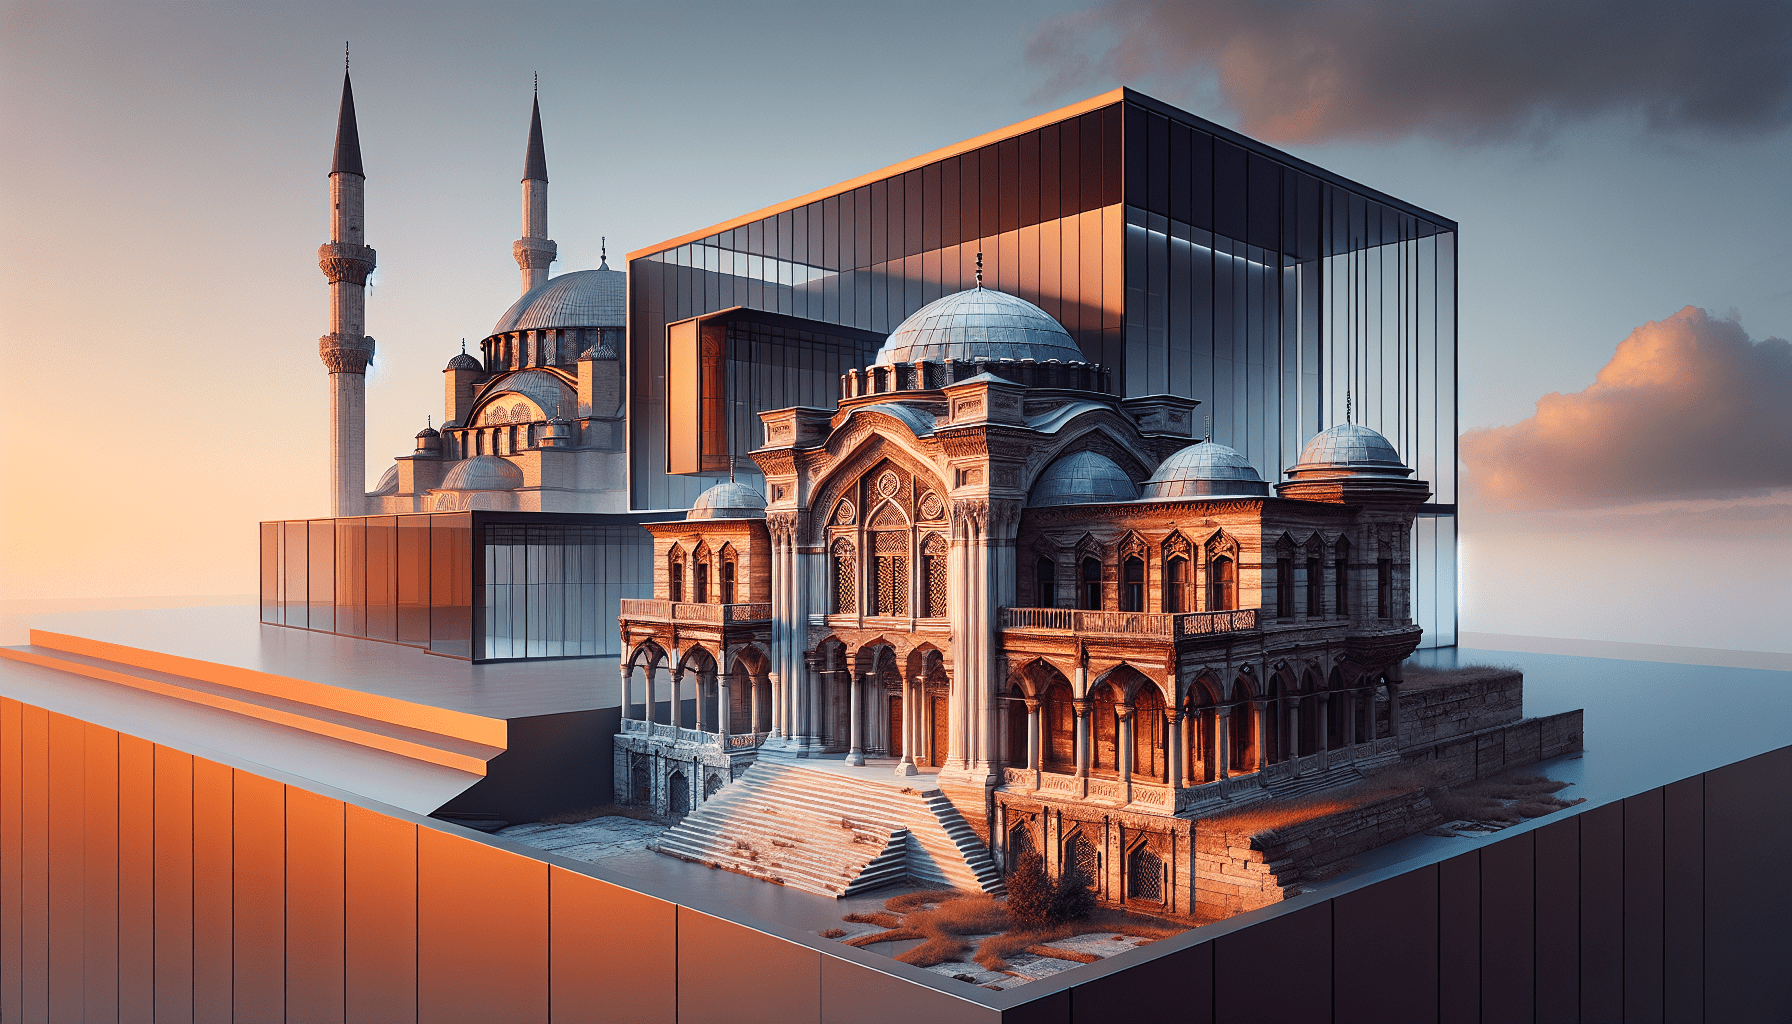 A modern glass building partially encloses a historical mosque with two minarets, blending contemporary and classical architecture under a sunset sky in Turkey.